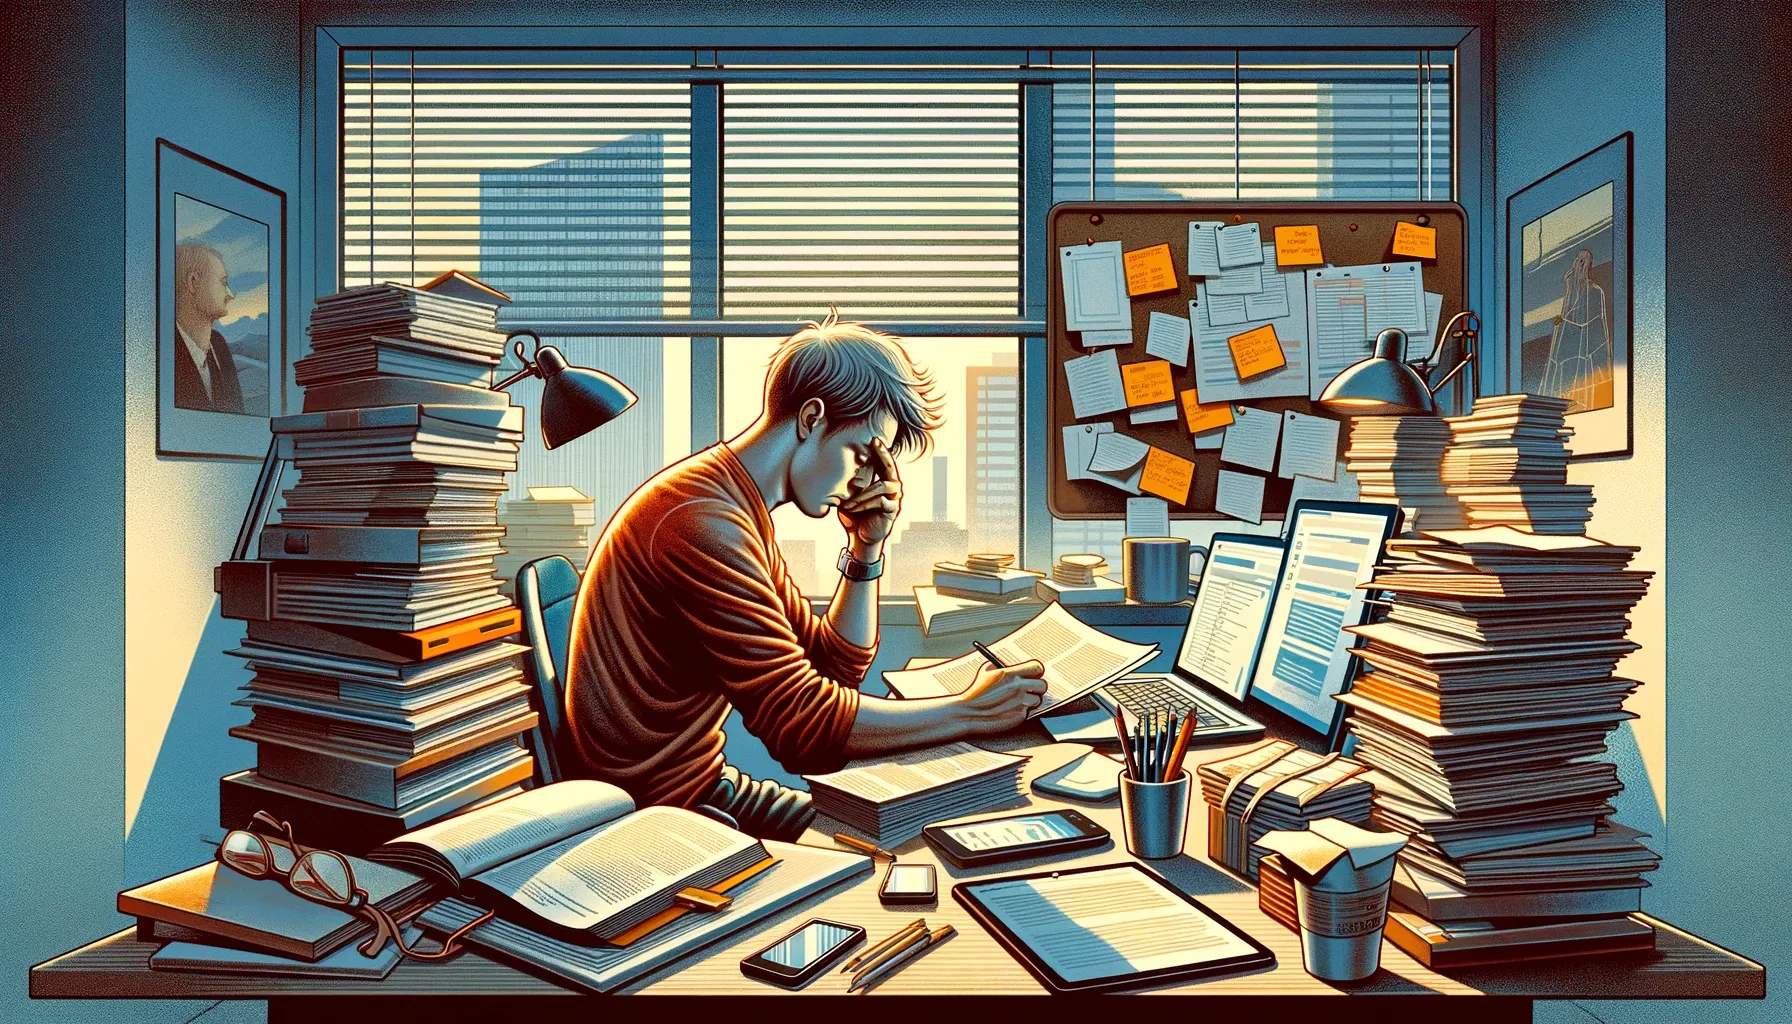 In a modern office, a person is focused on writing, surrounded by documents and a note-filled bulletin board, preferring analog methods over digital tech like the ignored computer and smartphone on the desk.